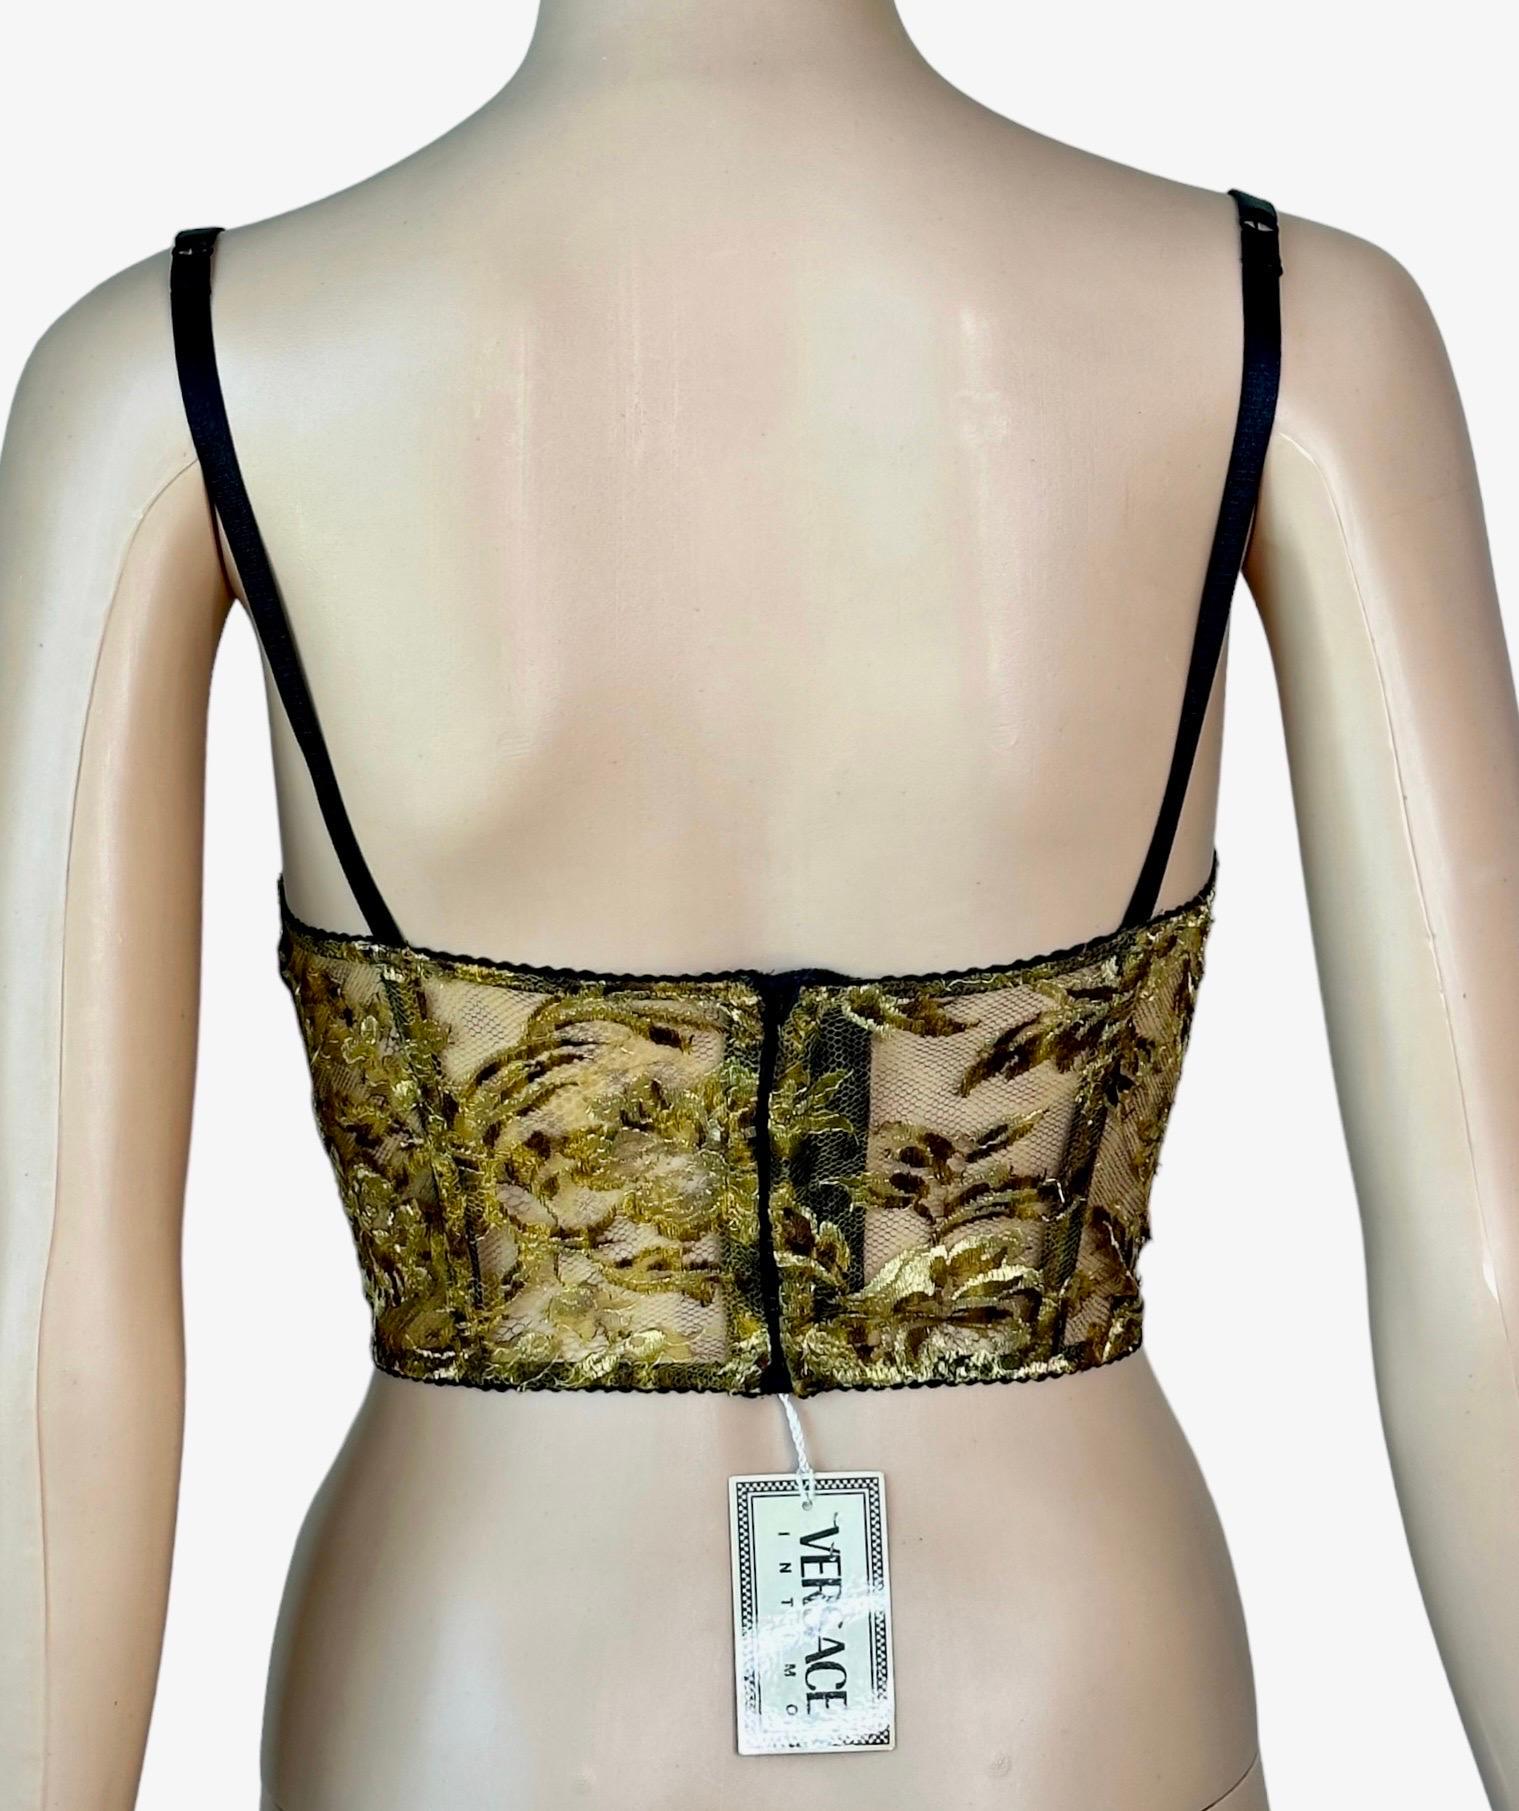 Gianni Versace S/S 1992 Unworn Sheer Gold Embroidered Lace Bustier Bra Crop Top  In New Condition For Sale In Naples, FL